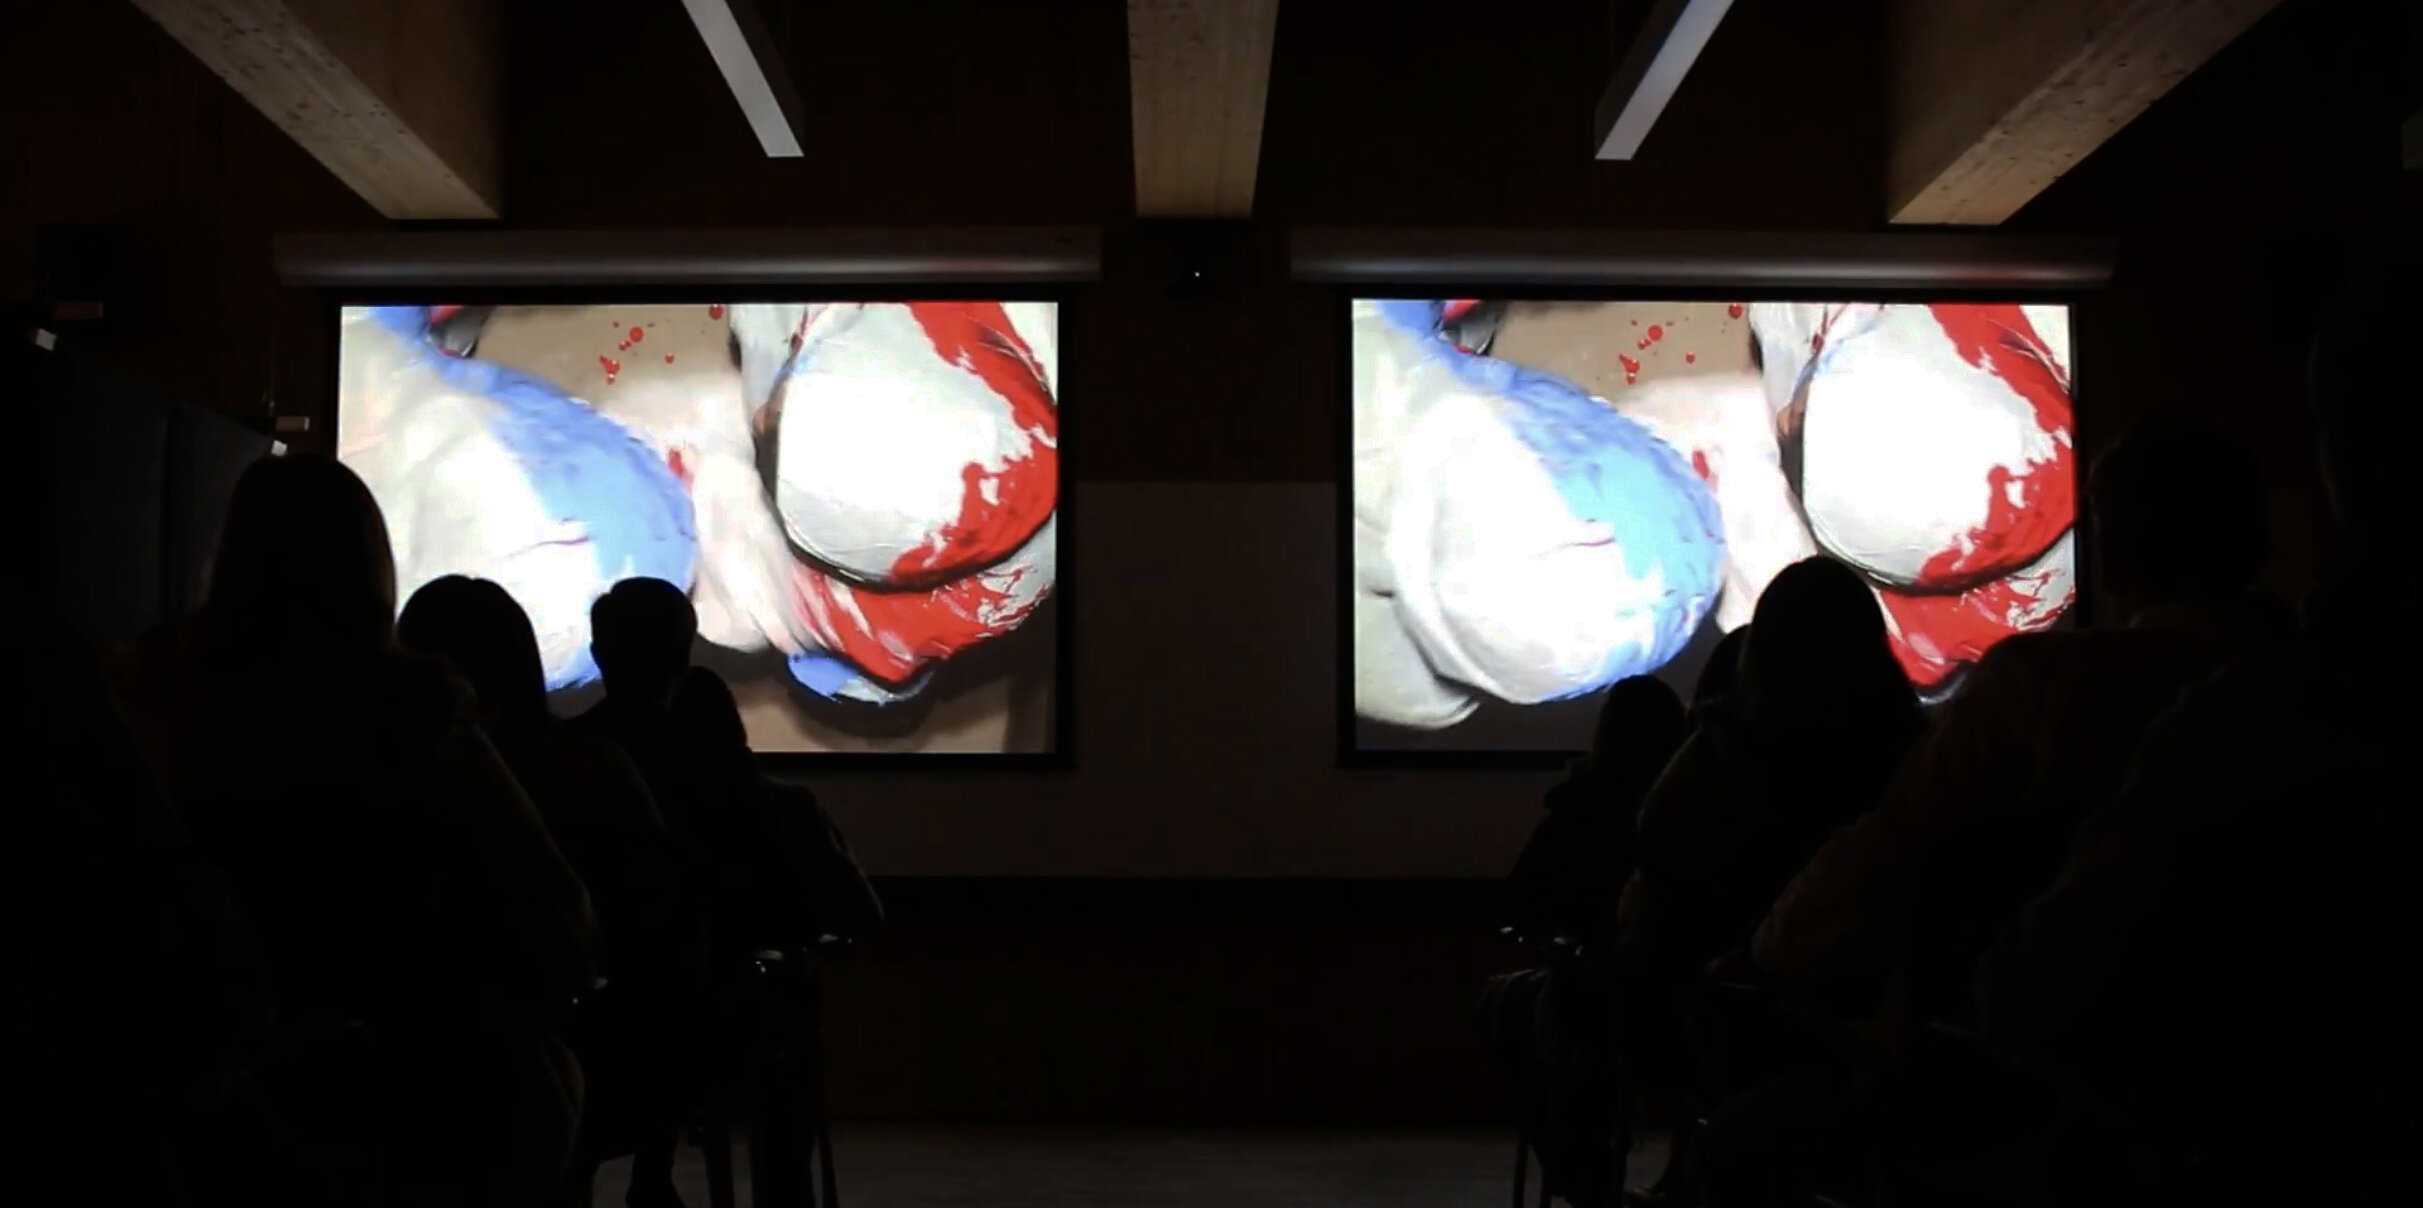  In this image the authors are filmed from above applying the blue and red paint to each other. The intimate shared struggle of the authors/performers is here mediated for the audience through the lens of a camera installed on the ceiling. Photograph